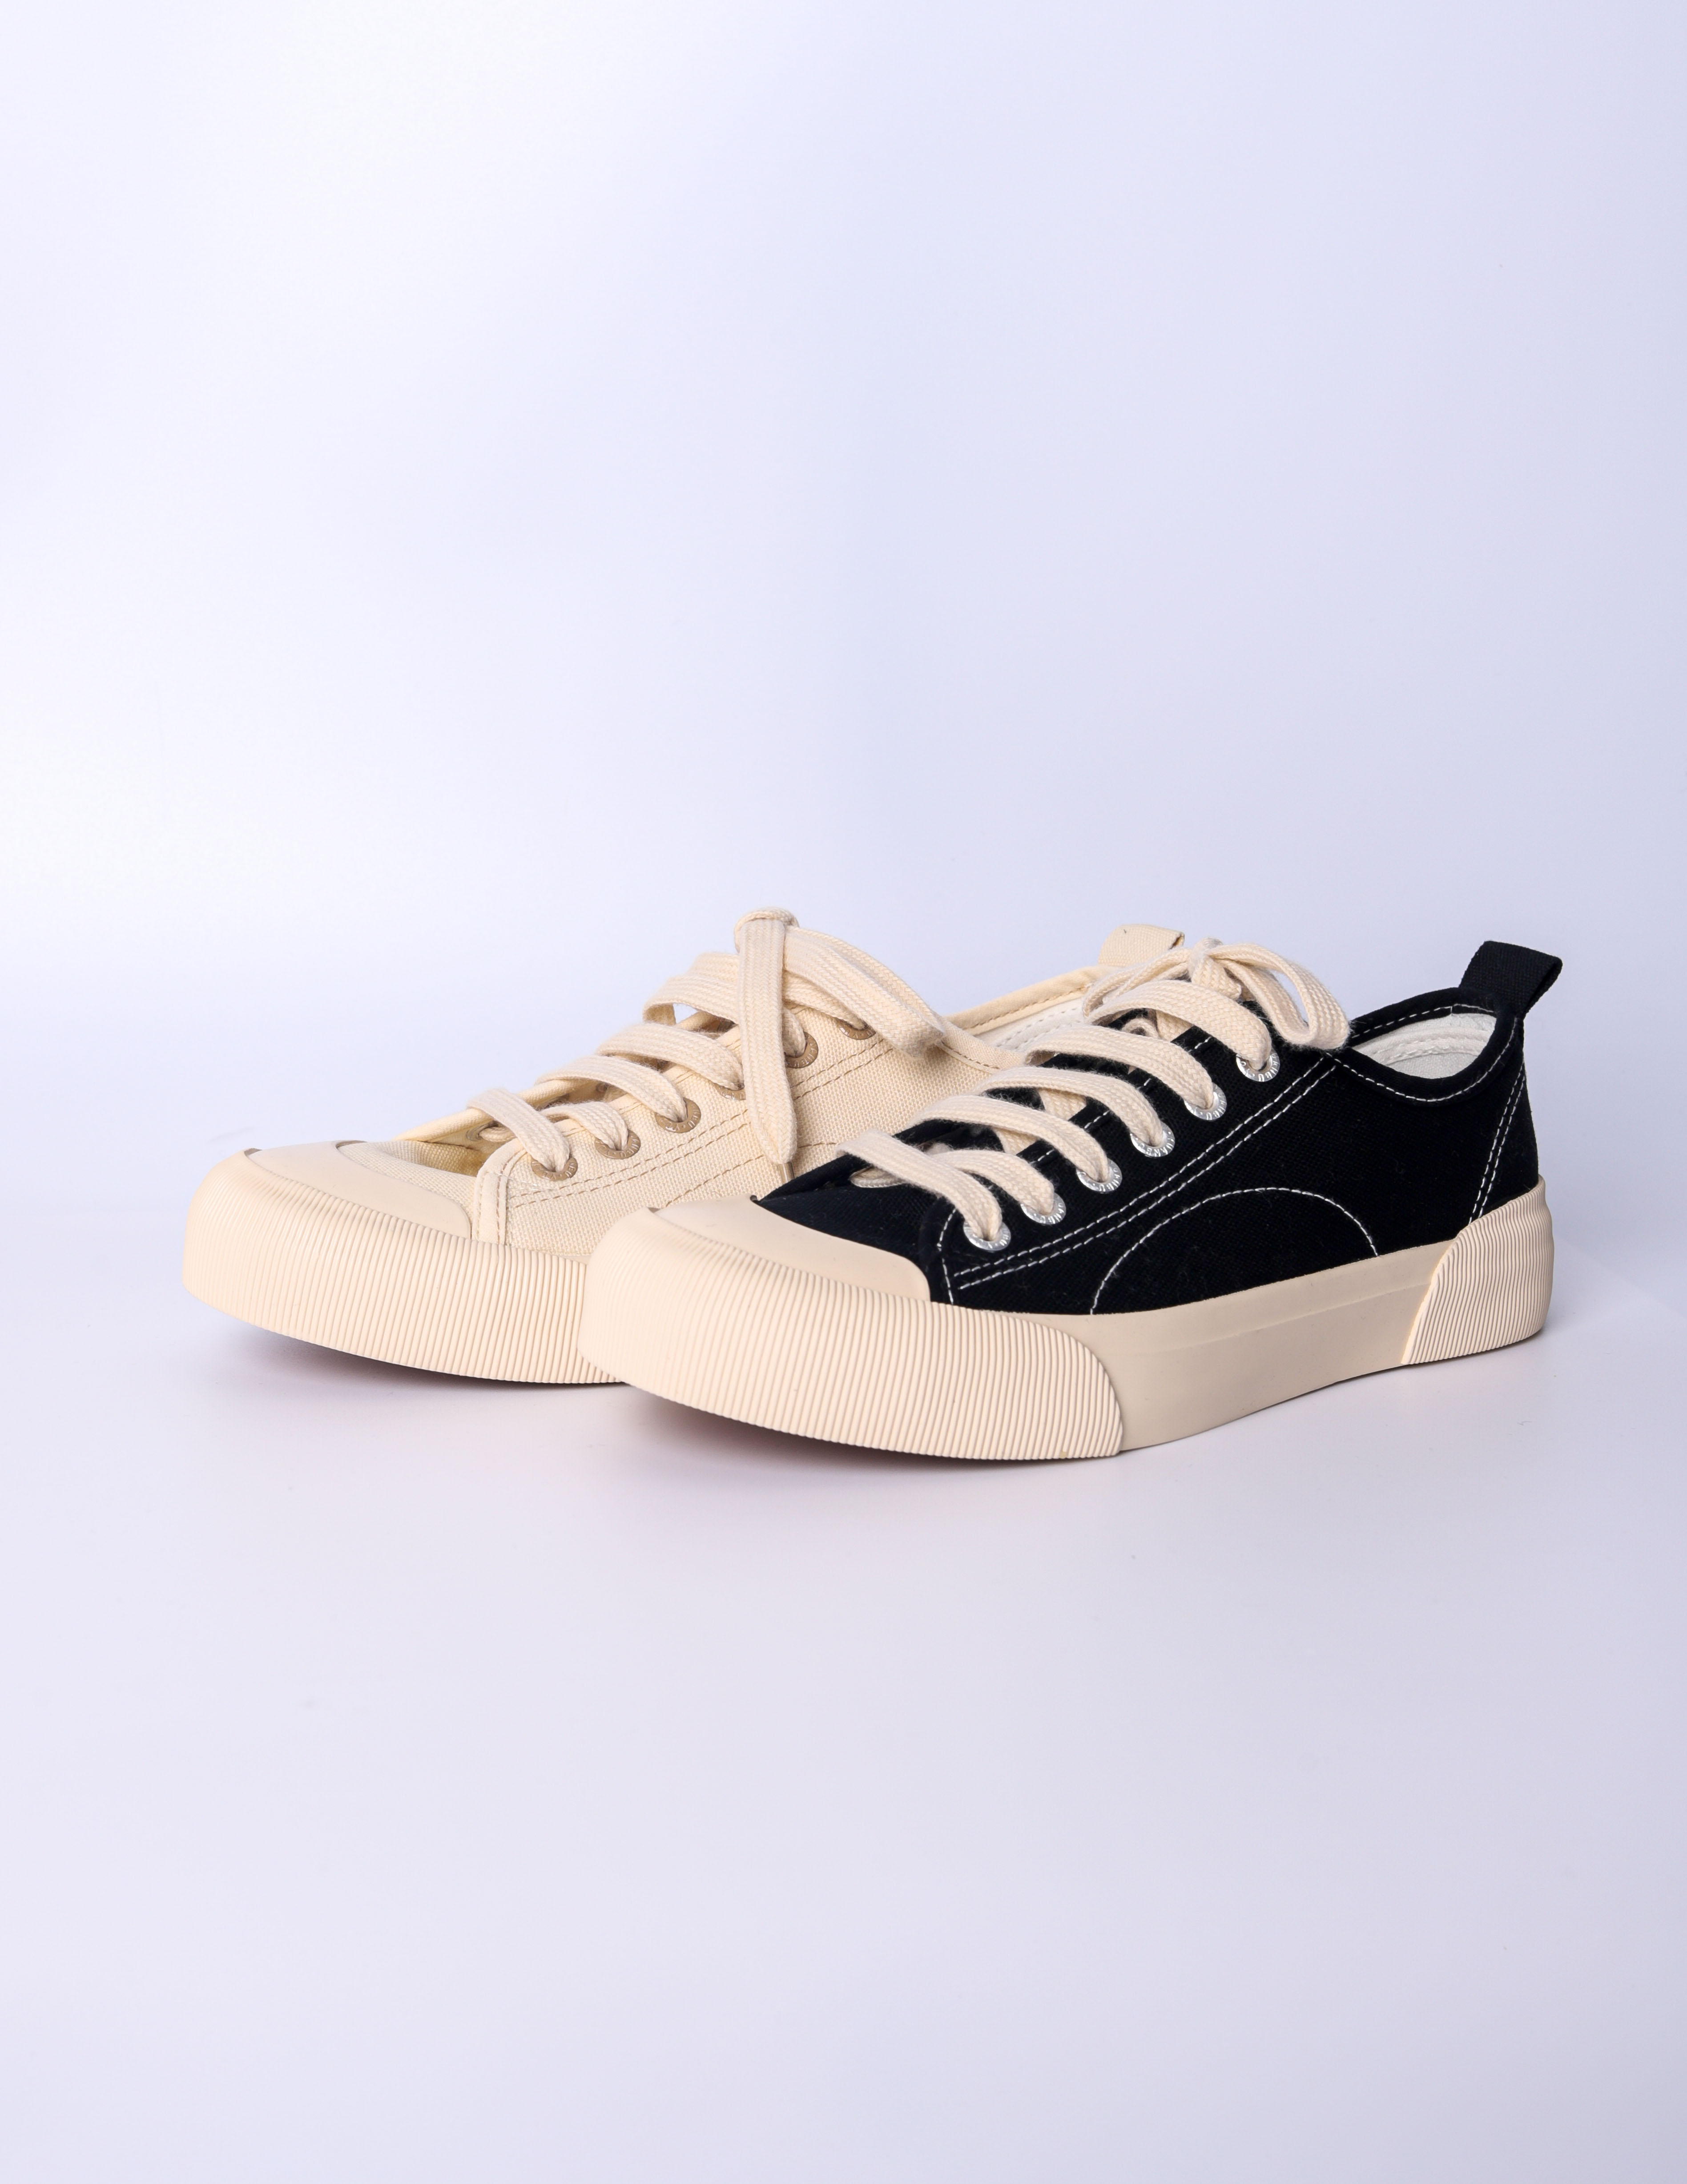 Round Toe Lace-Up Sneakers